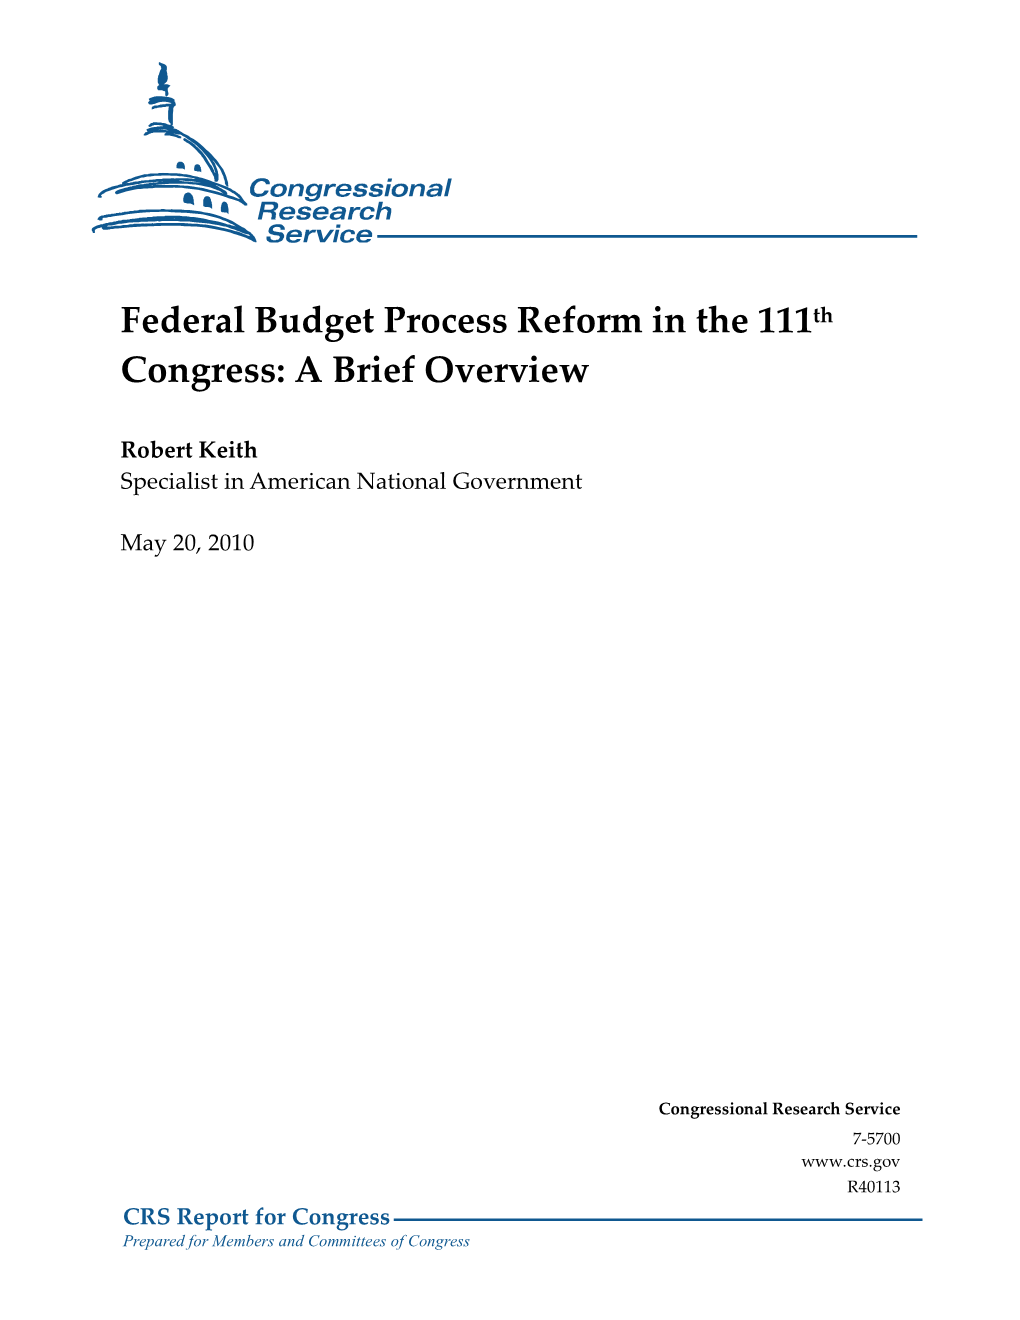 Federal Budget Process Reform in the 111Th Congress: a Brief Overview